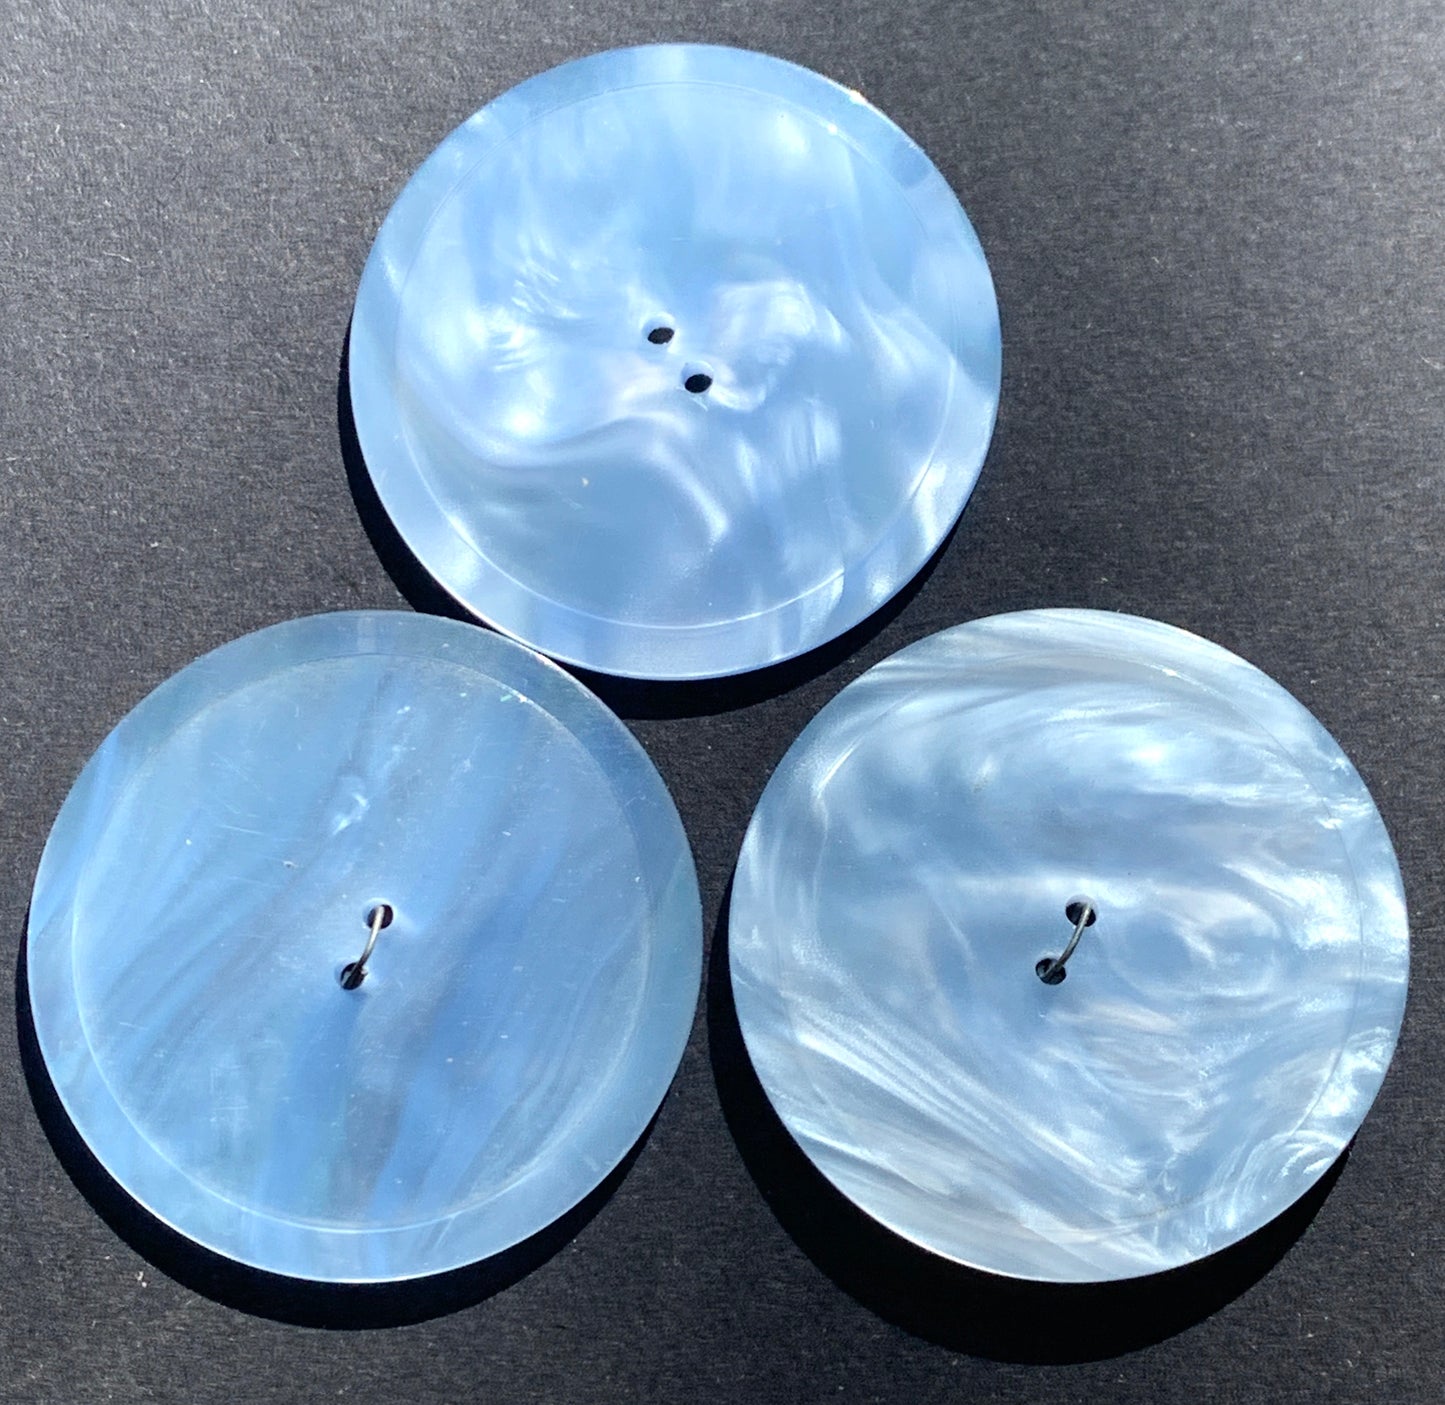 1 Moonglow Lucite Silvery Blue 3.7cm Buttons